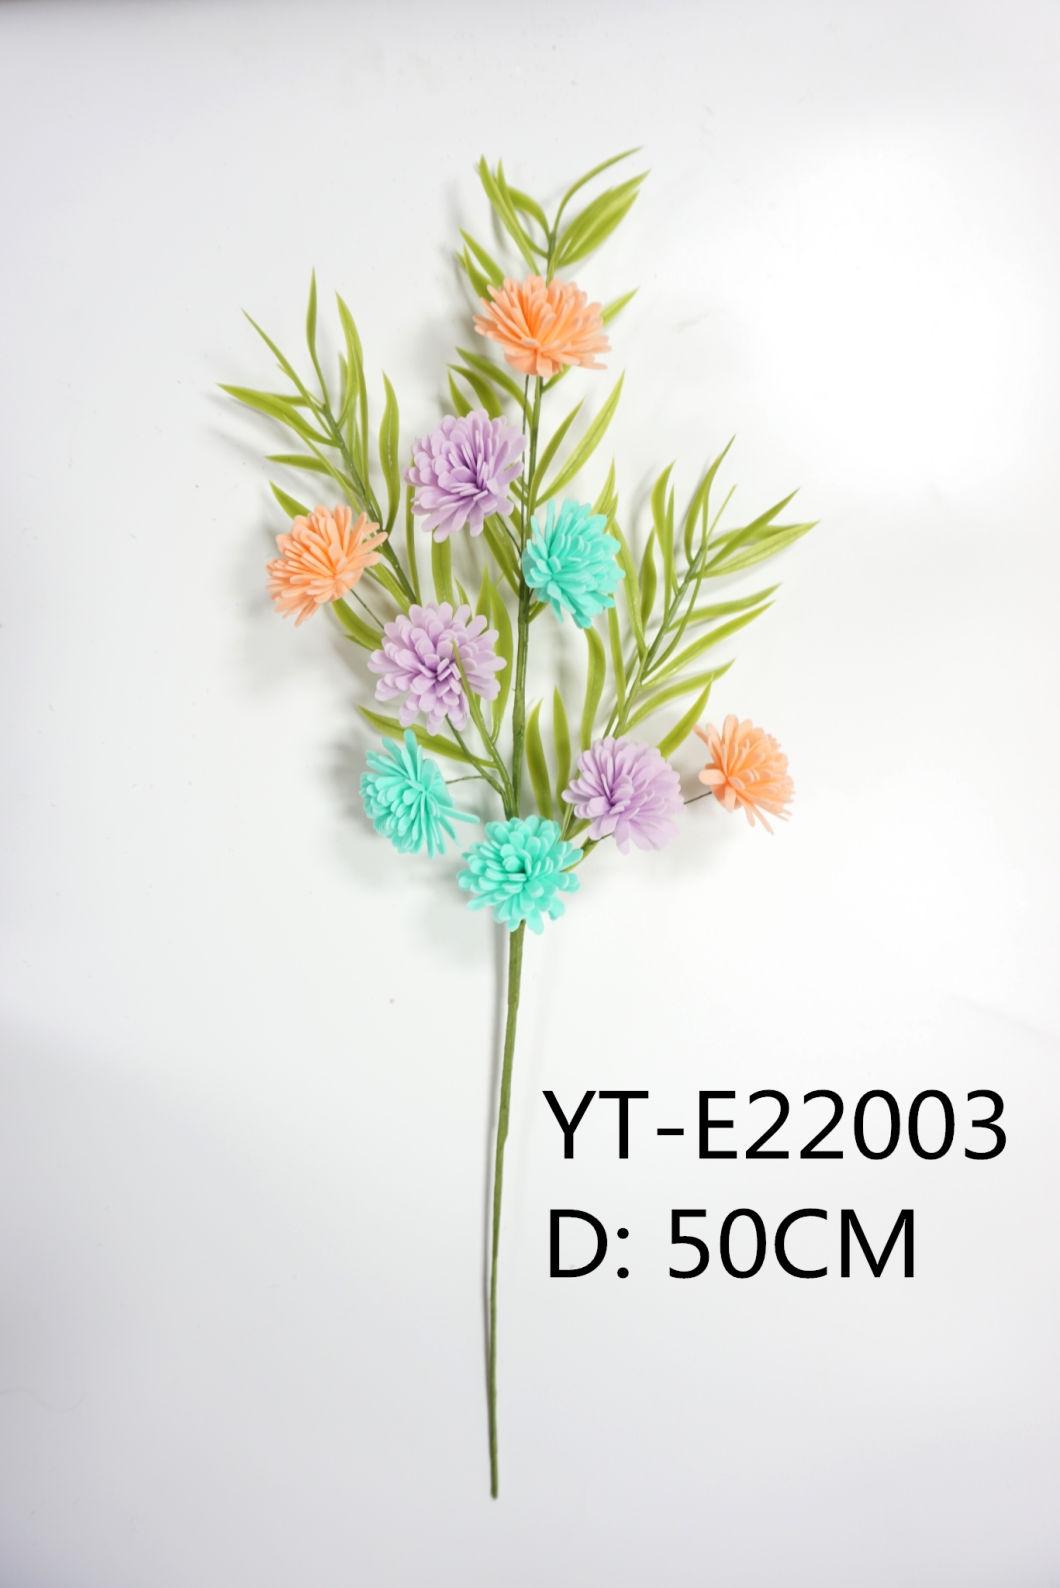 Yt-E22018 Factory Price Easter Eggs Pick as The Easter Gift